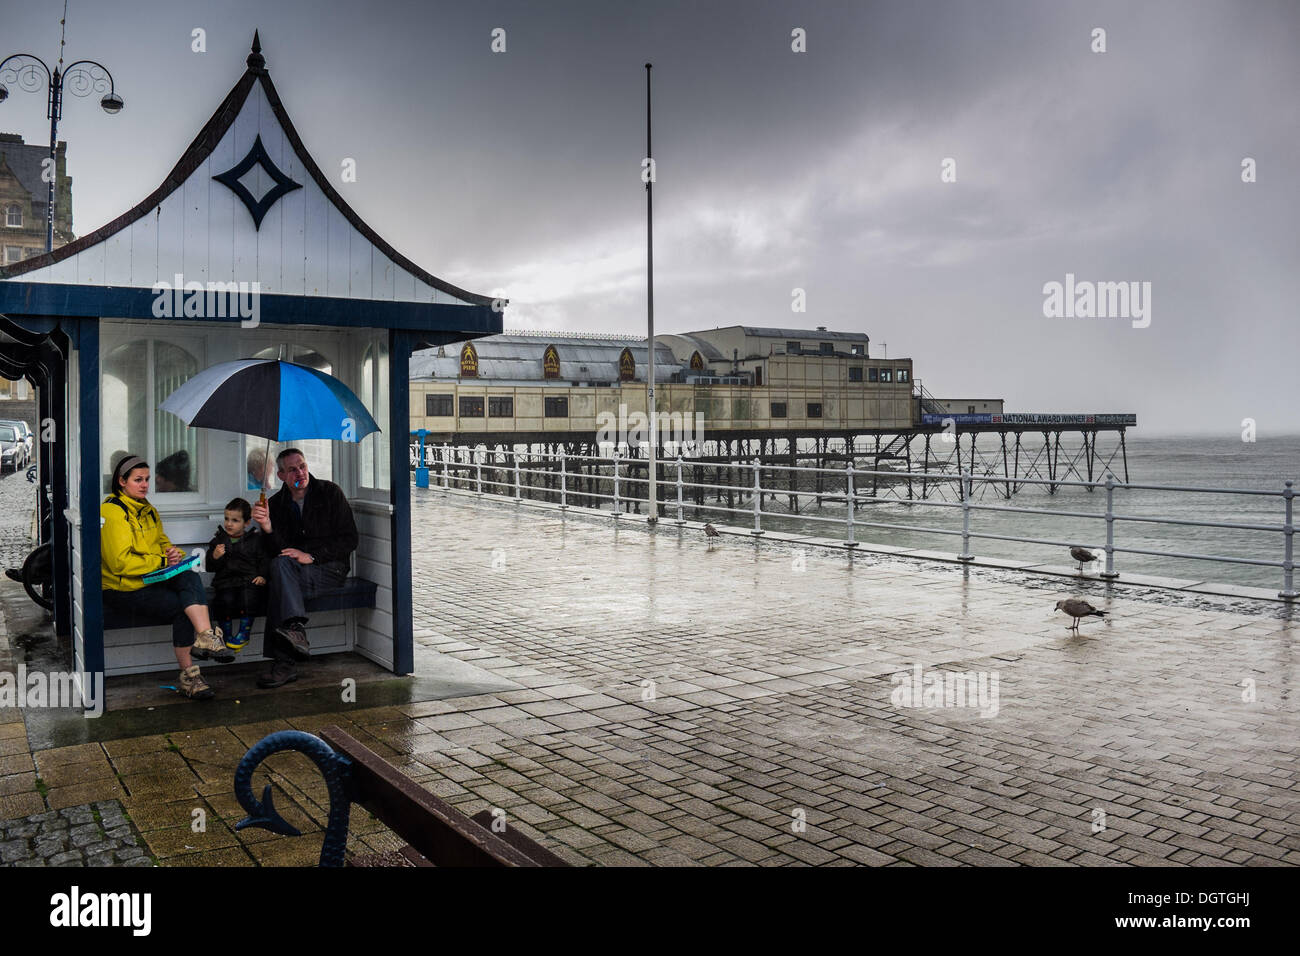 Aberystwyth Wales UK, October 25 2013 A family sheltering from the heavy thundery rain sweeping in off the sea at Aberystwyth in the west wales coast. The weather in the west and south of the UK is expected to turn dramatically stormier over the next 48 hours, with winds of up to 90mph forecast for many southern counties photo Credit:  keith morris/Alamy Live News Stock Photo